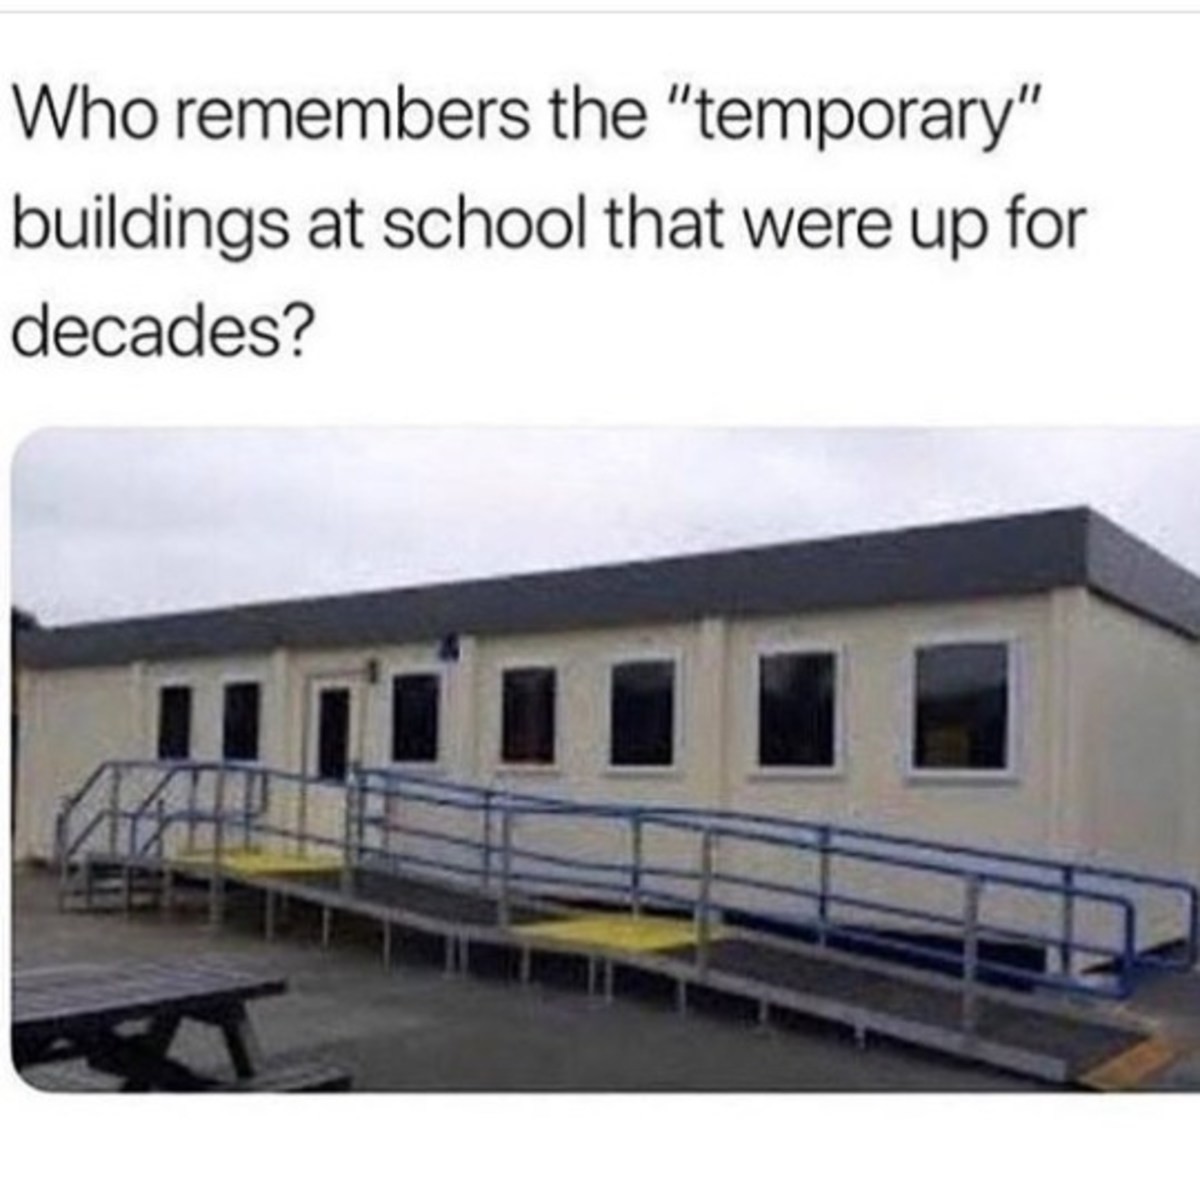 public school memes - Who remembers the "temporary" buildings at school that were up for decades?